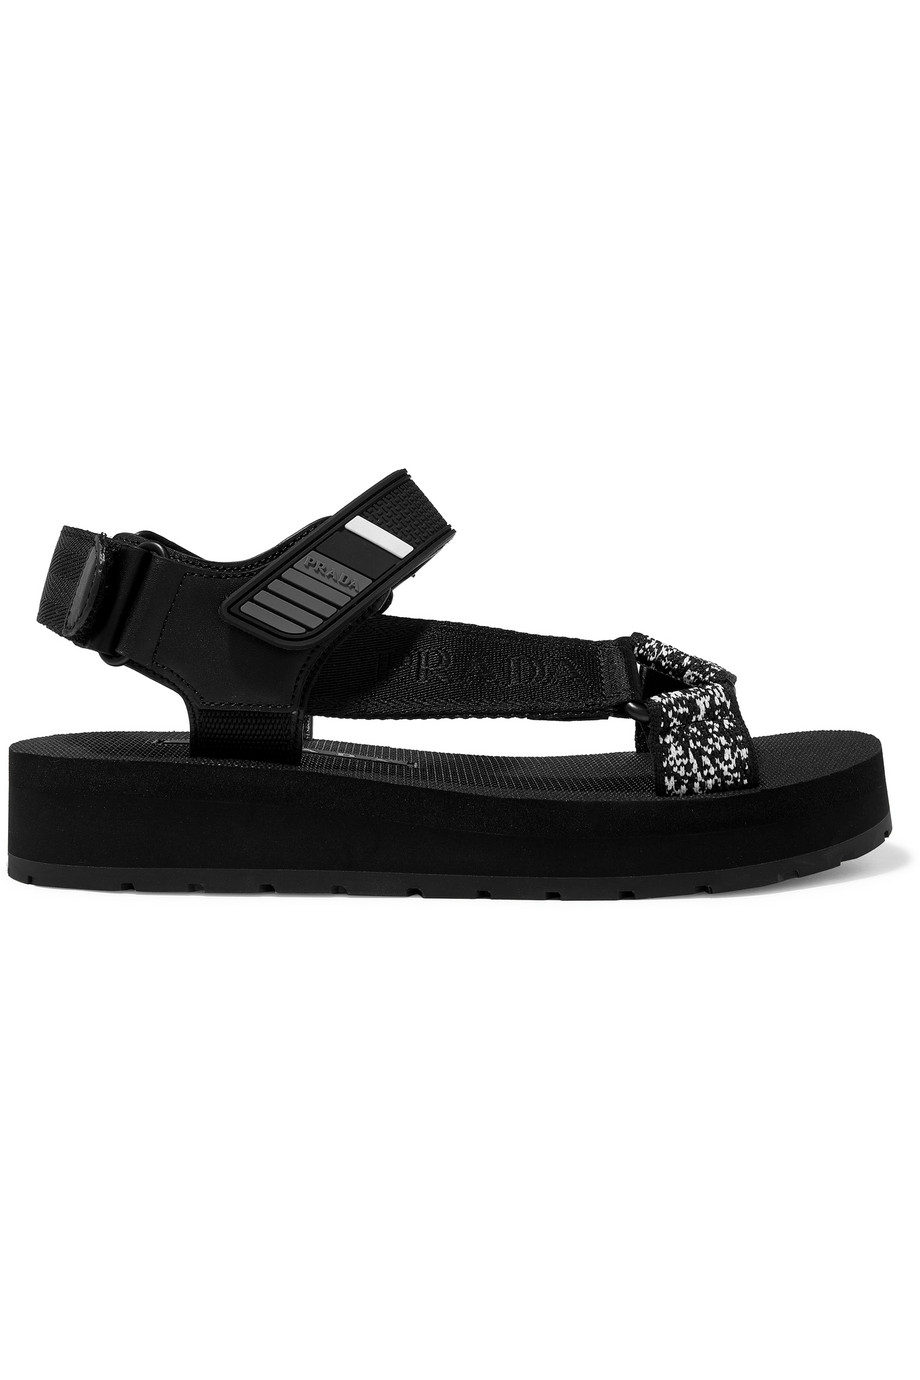 Chunky dad sandals are the cool, new footwear in town, Lifestyle News ...